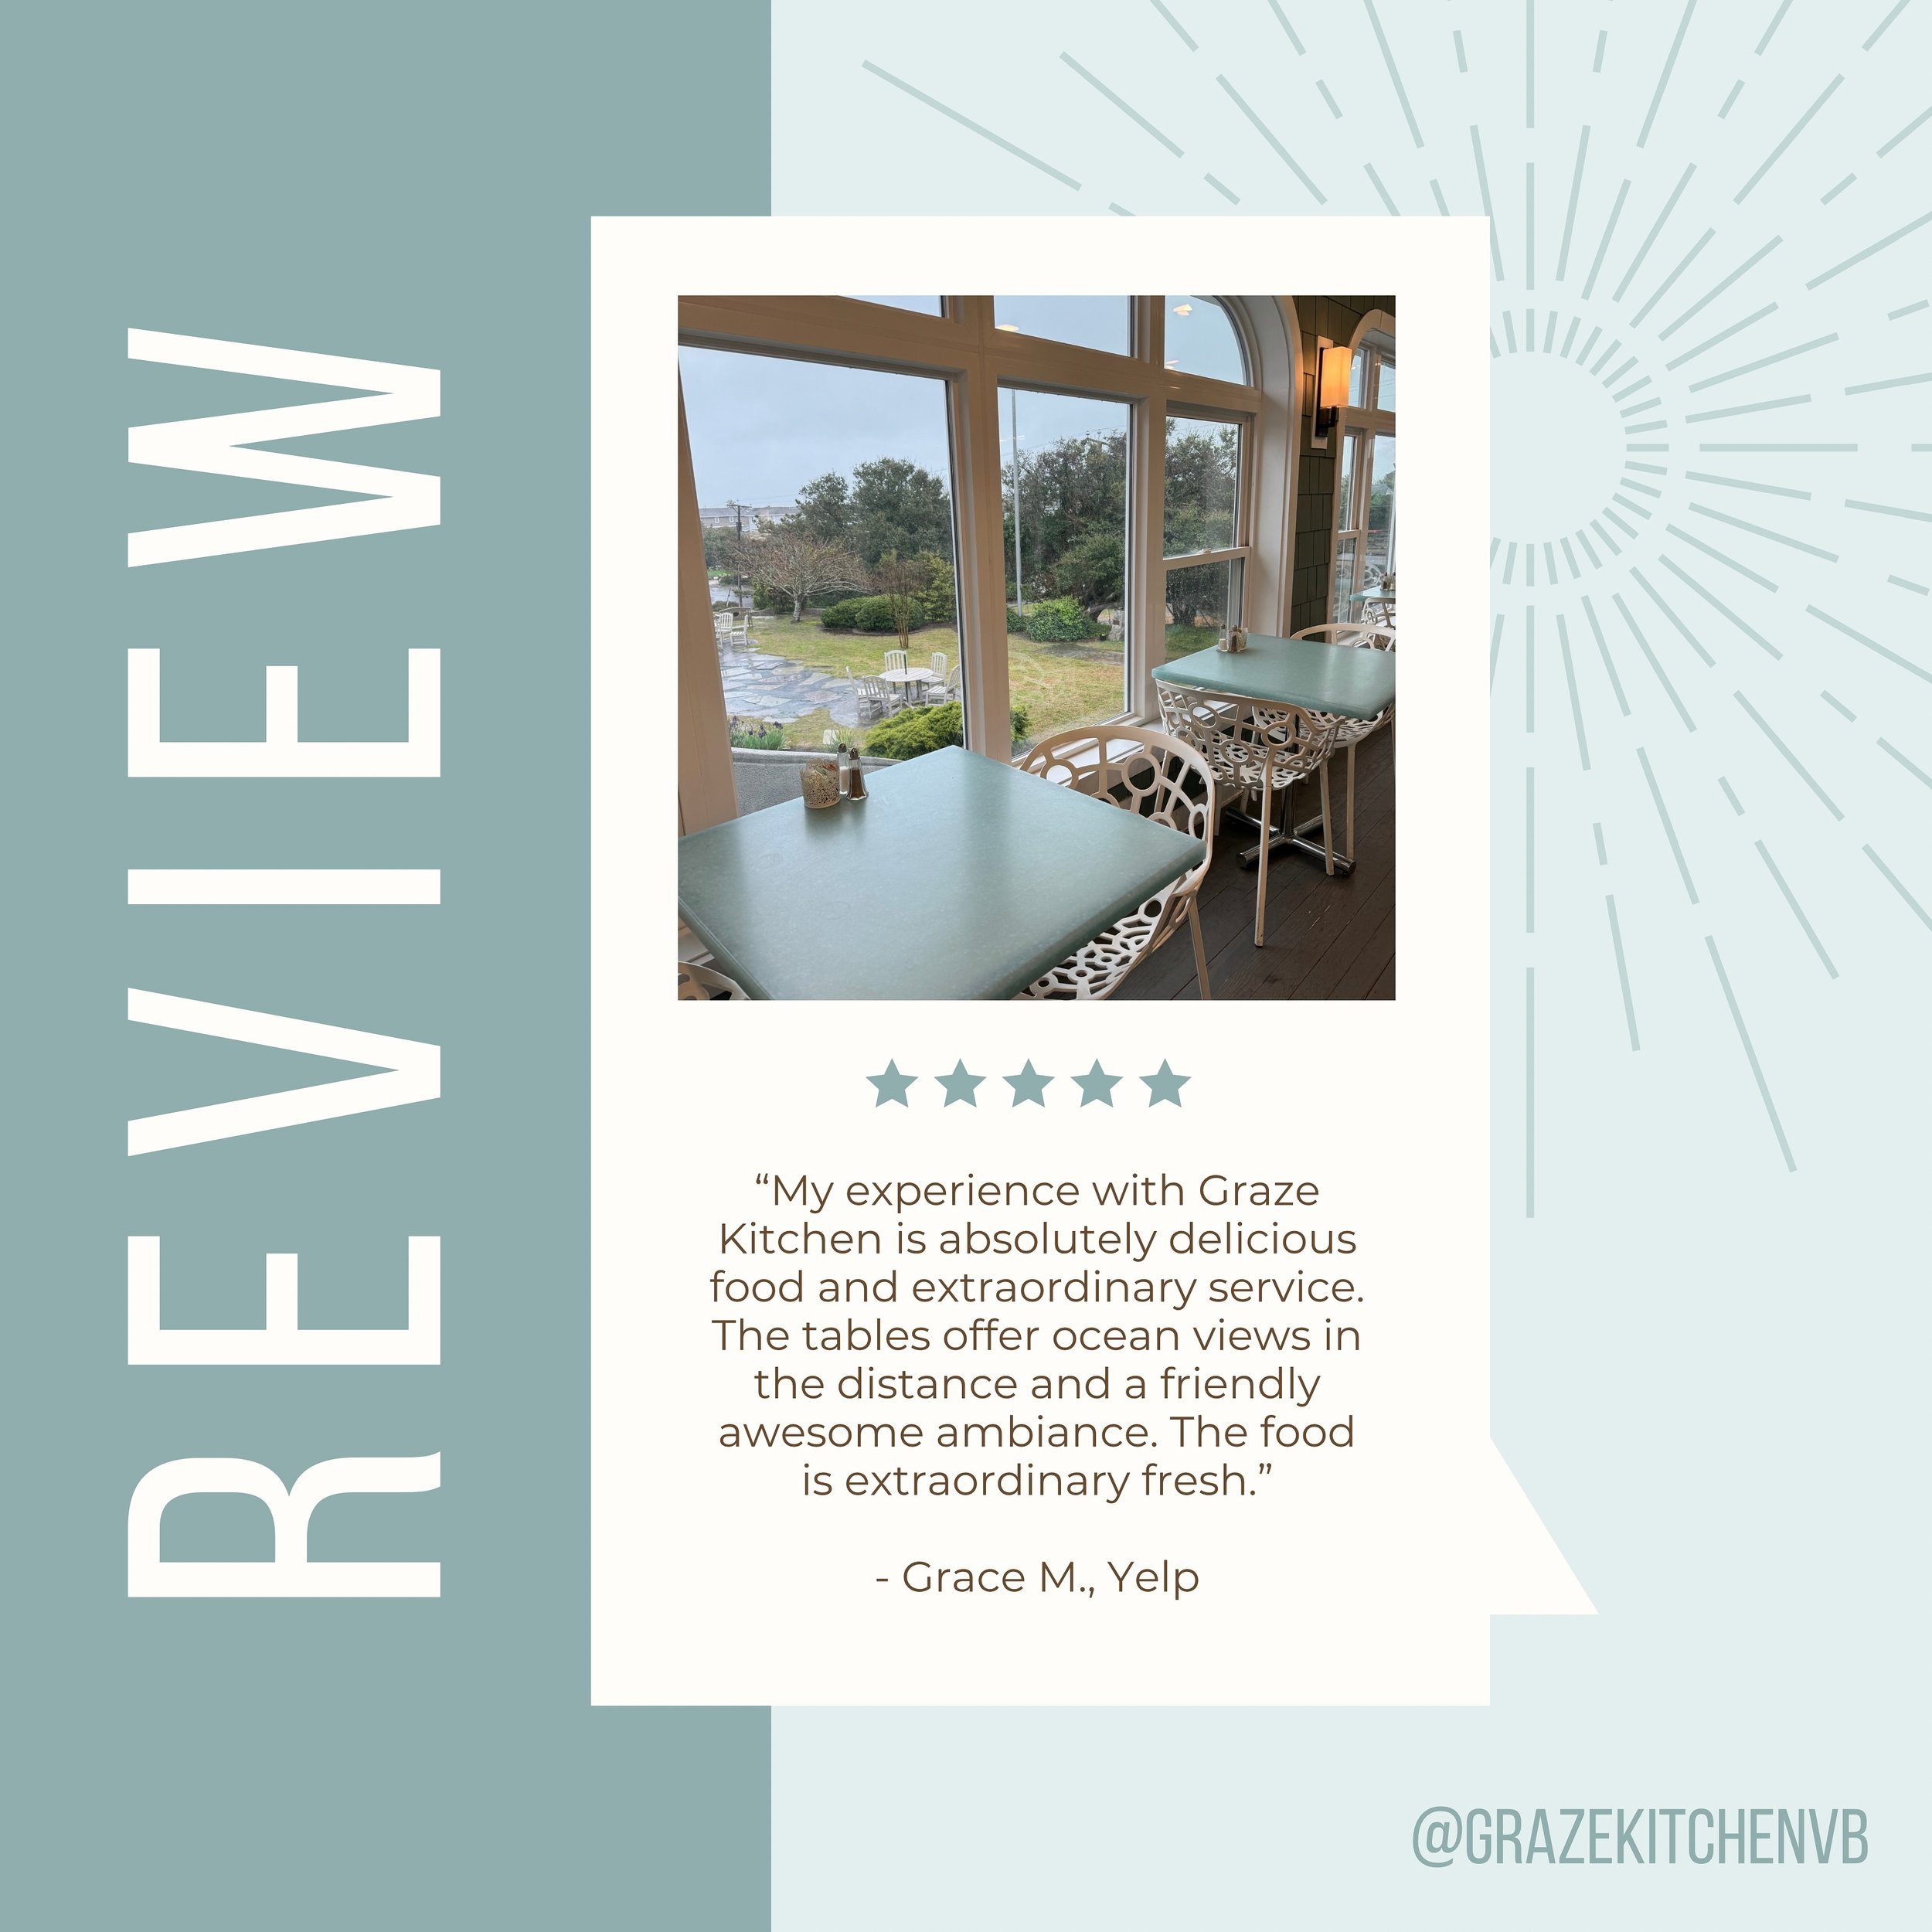 &ldquo;My experience with Graze Kitchen is absolutely delicious food and extraordinary service. The tables offer ocean views in the distance and a friendly awesome ambiance. The food is extraordinary fresh.&rdquo;

- Grace M., Yelp

⭐️⭐️⭐️⭐️⭐️

We&rs